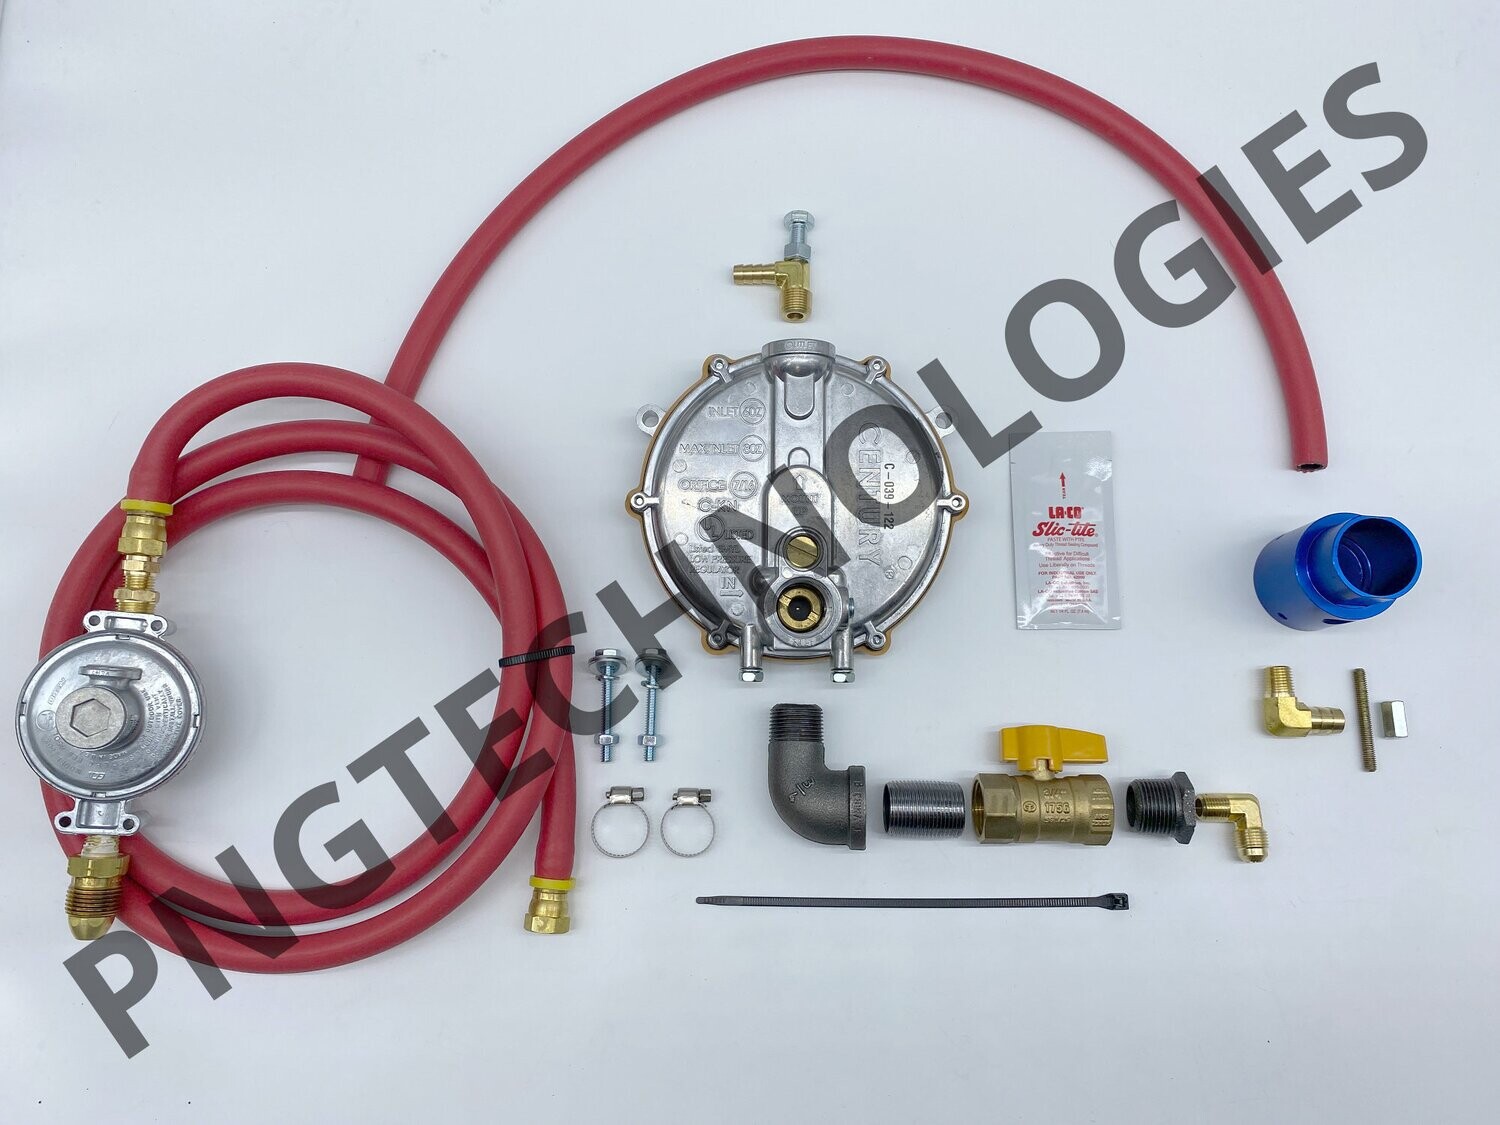 Honda Engine Propane Kit Engine numbers GX120 , GX160 with Quick Connects